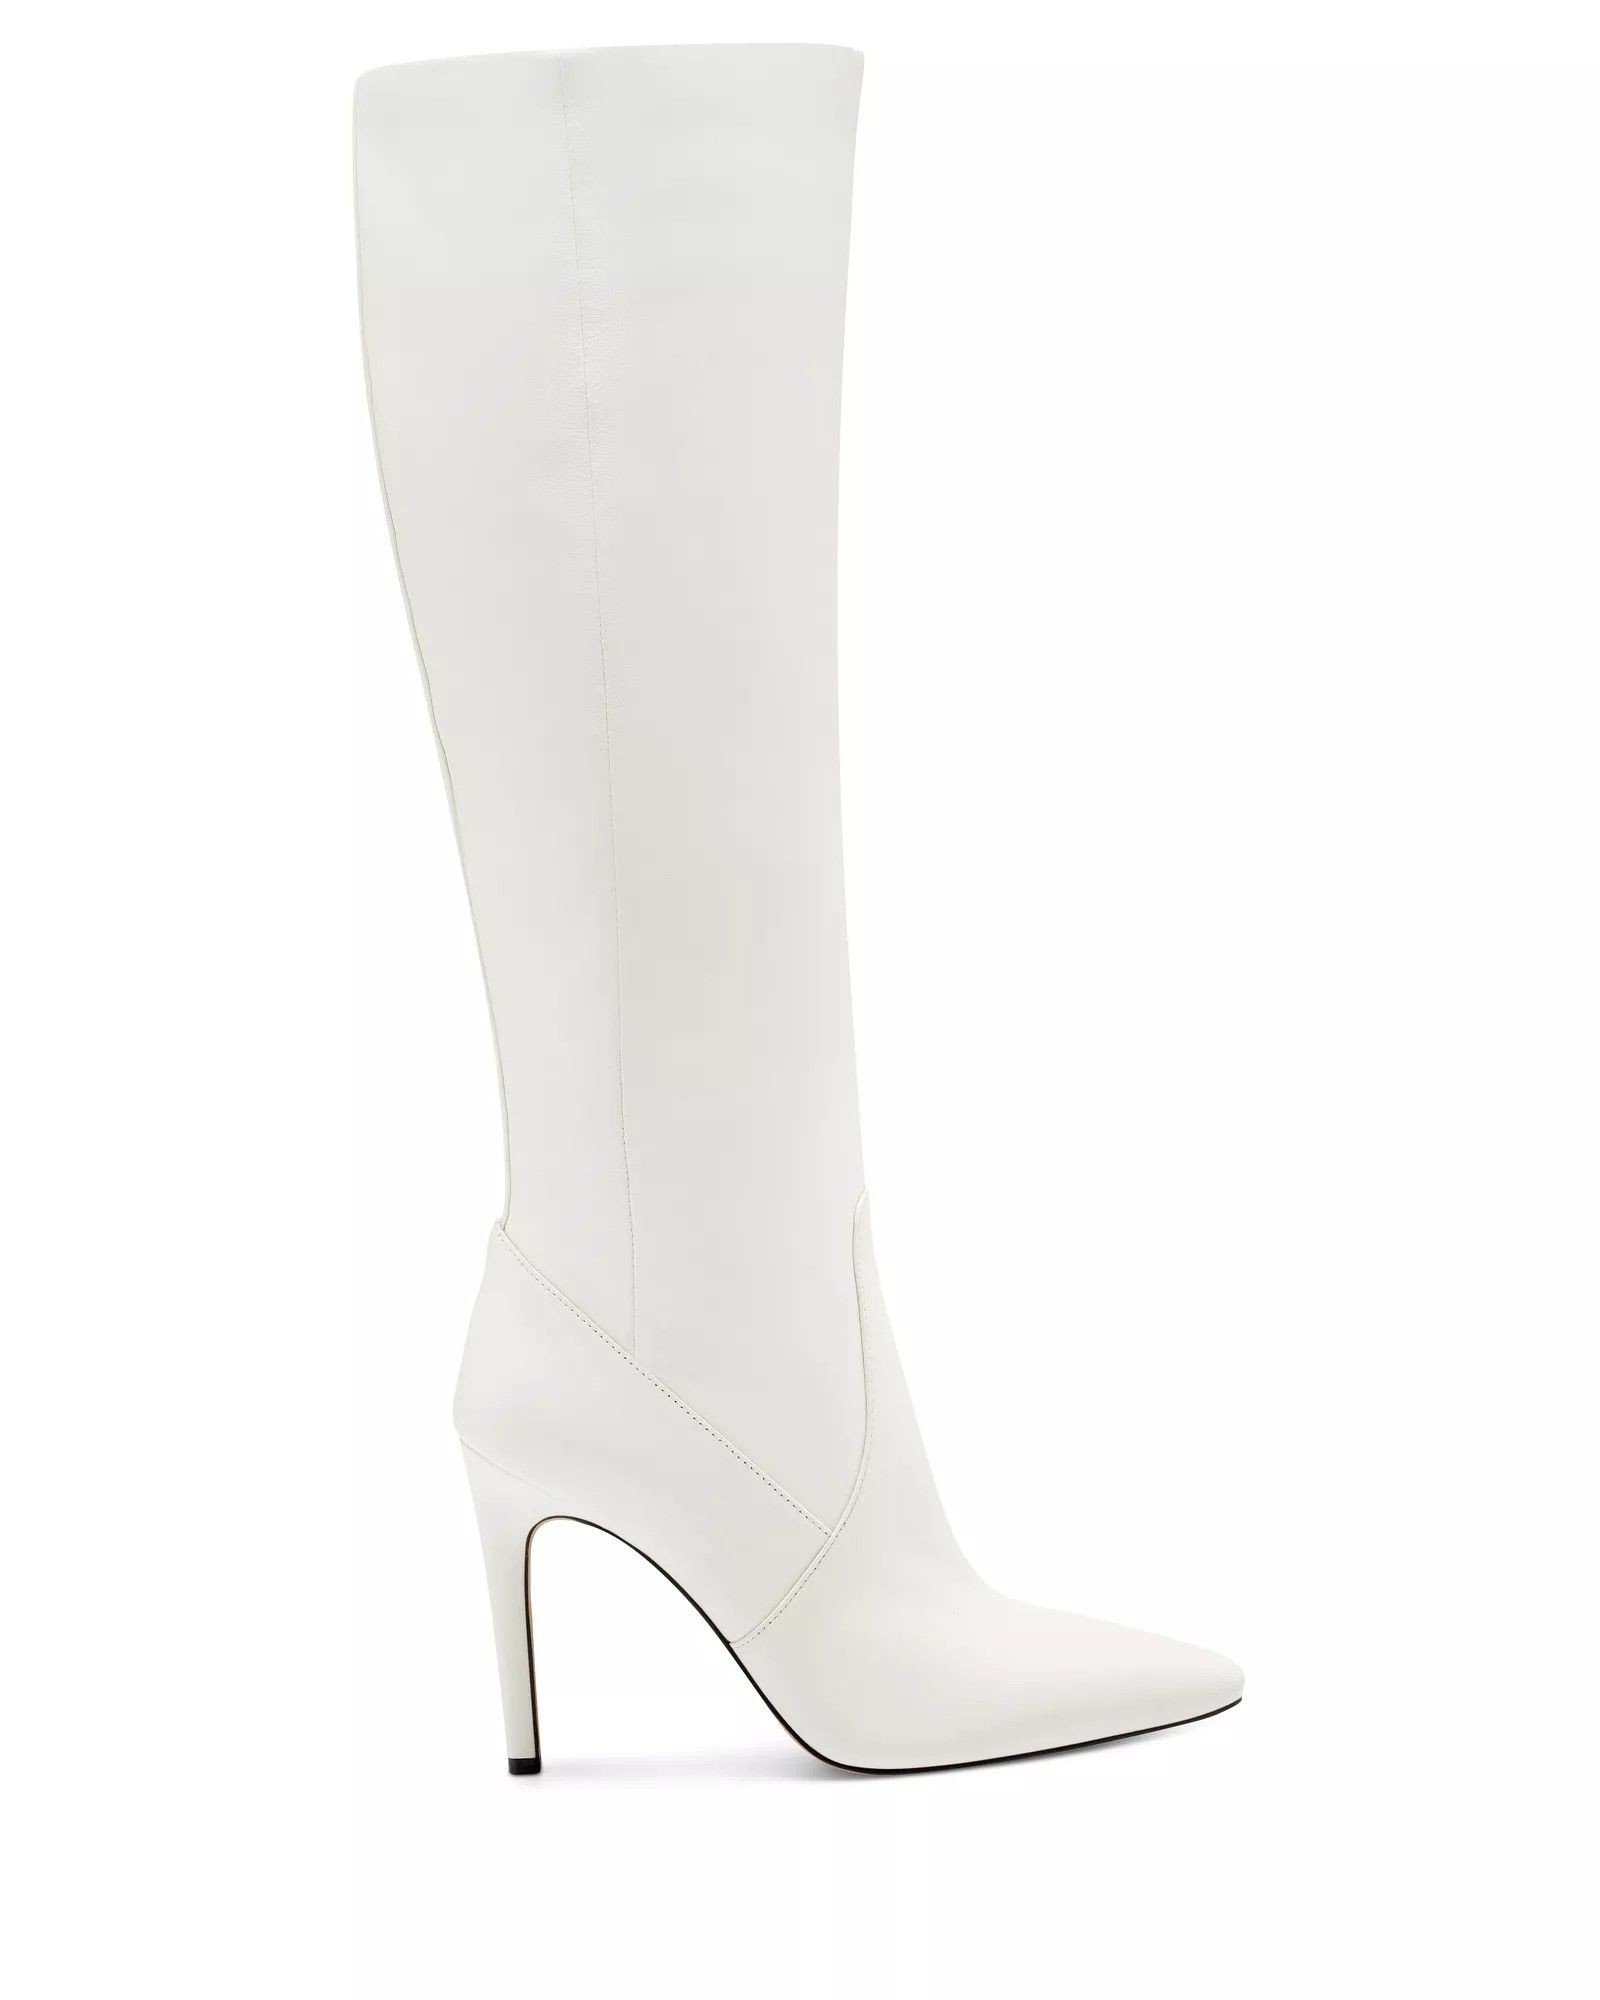 Fendels Tall Boot | Vince Camuto